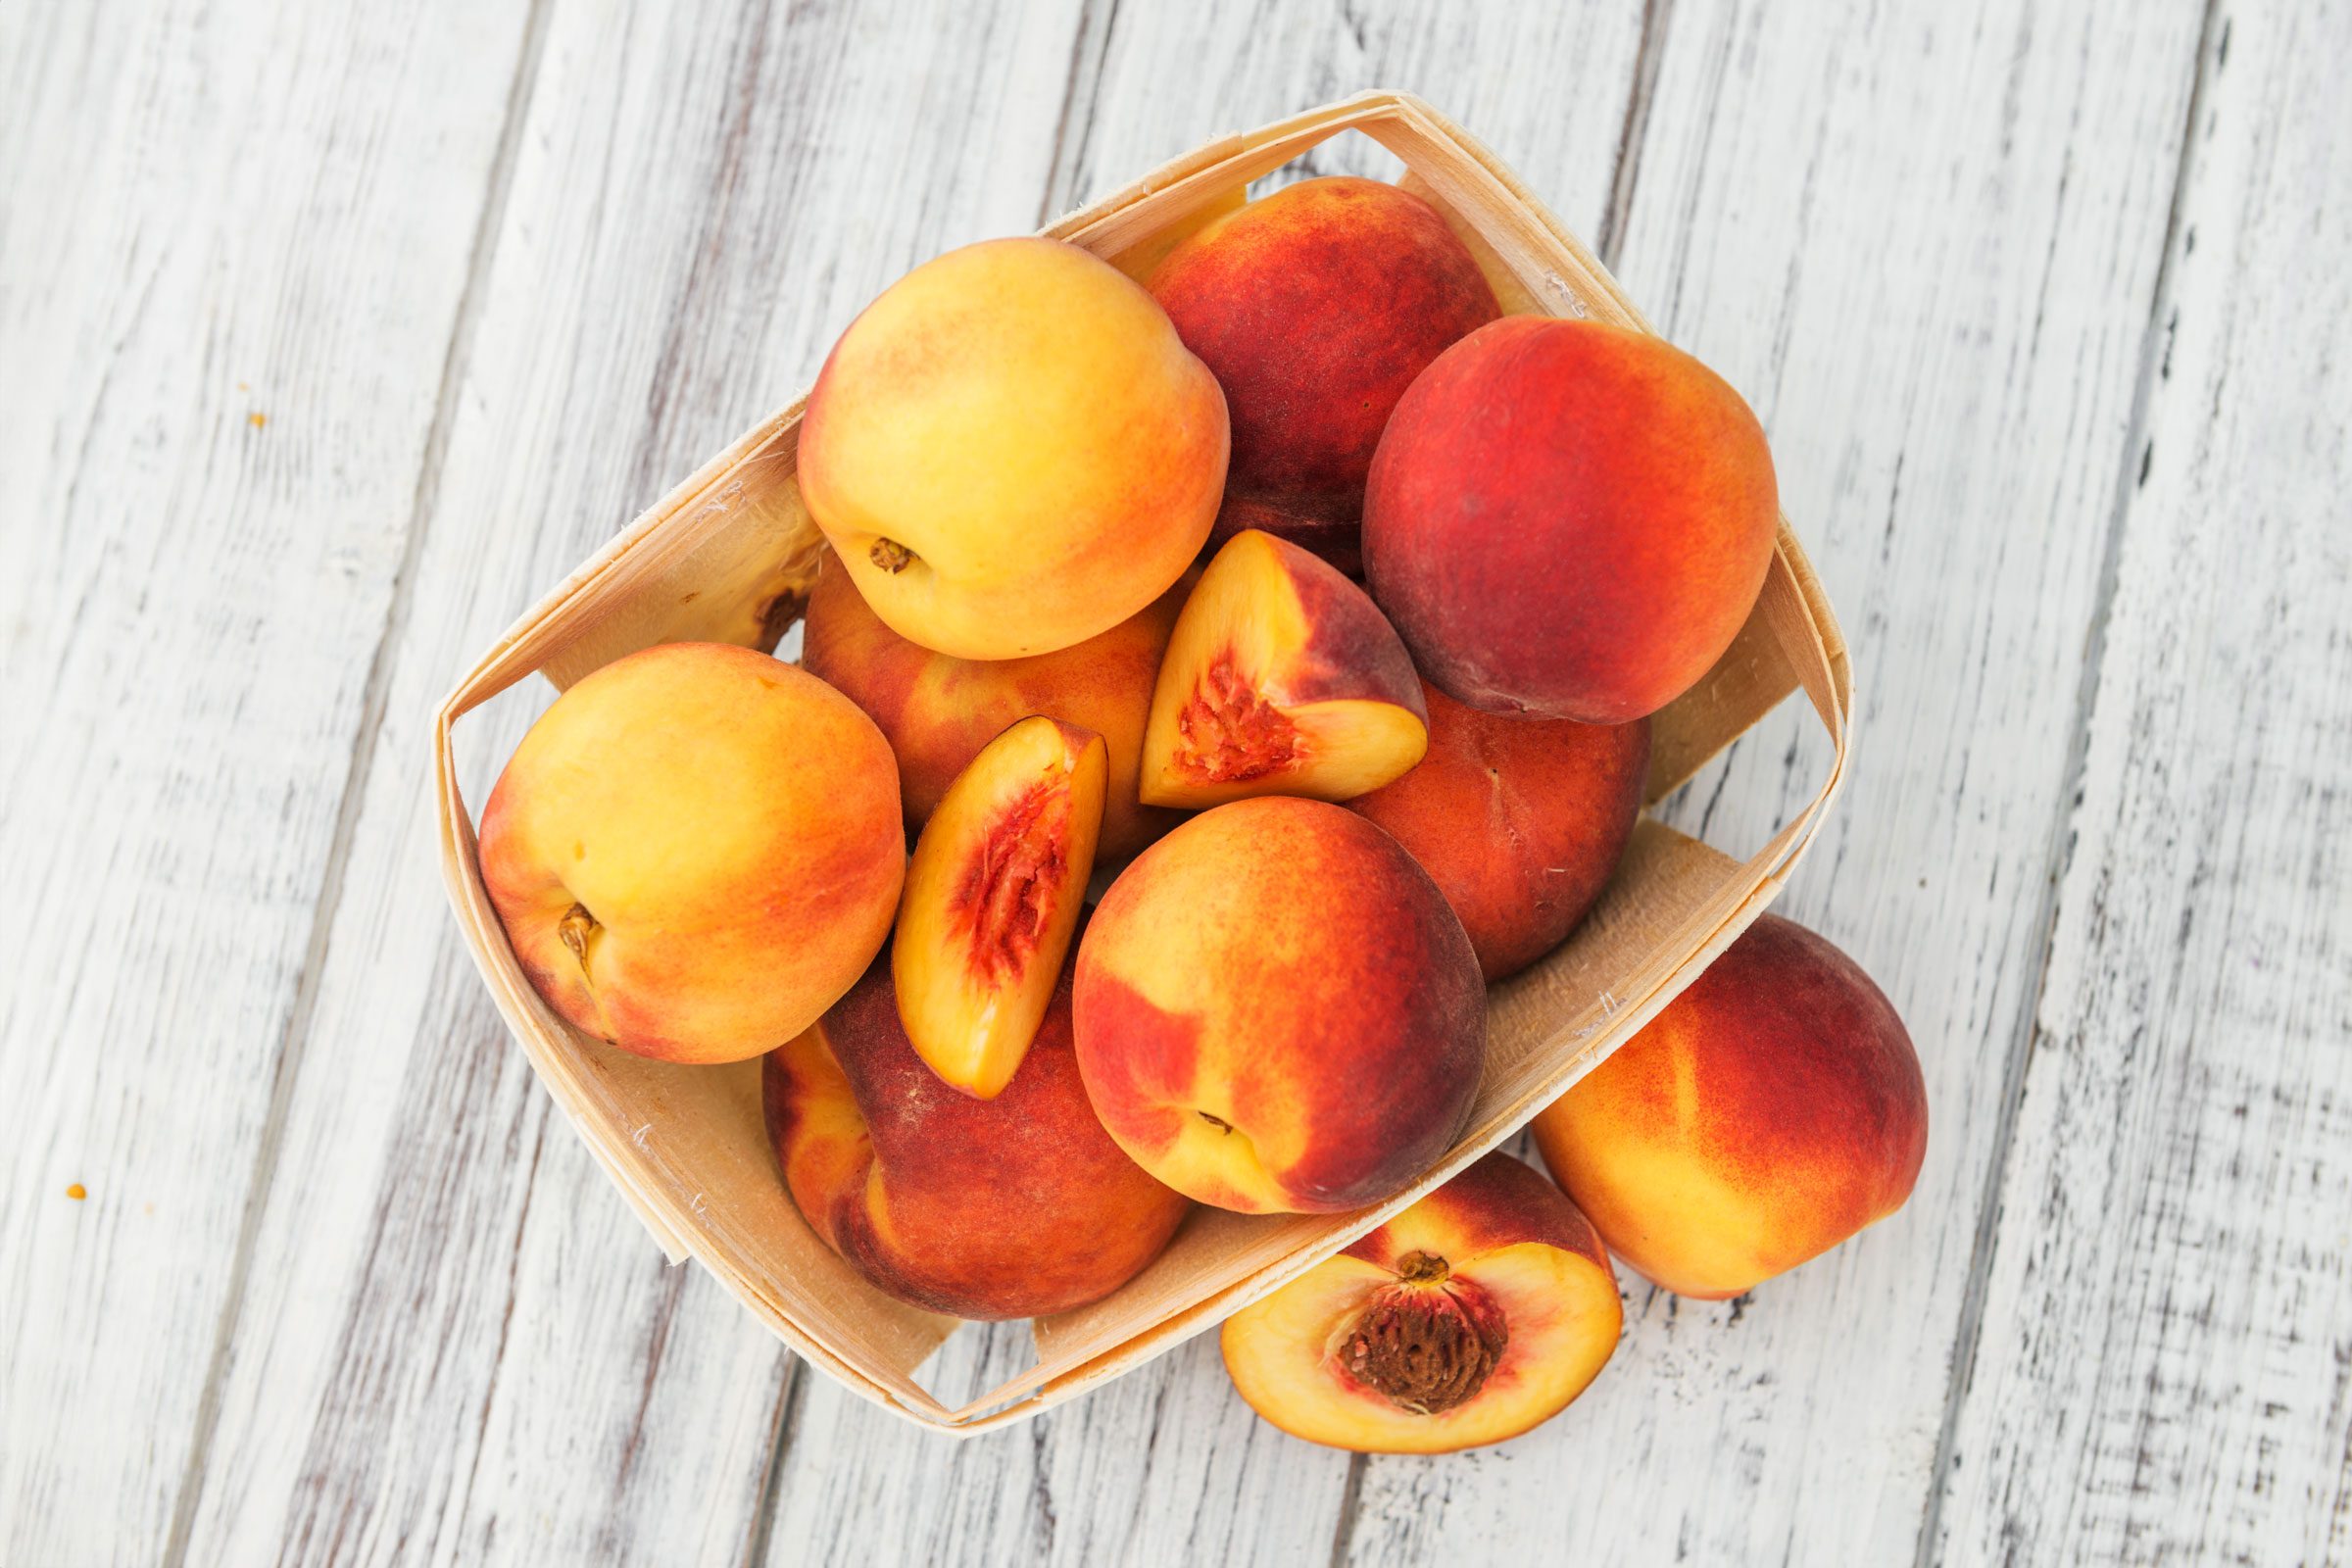 peaches in a wooden container on white wood surface